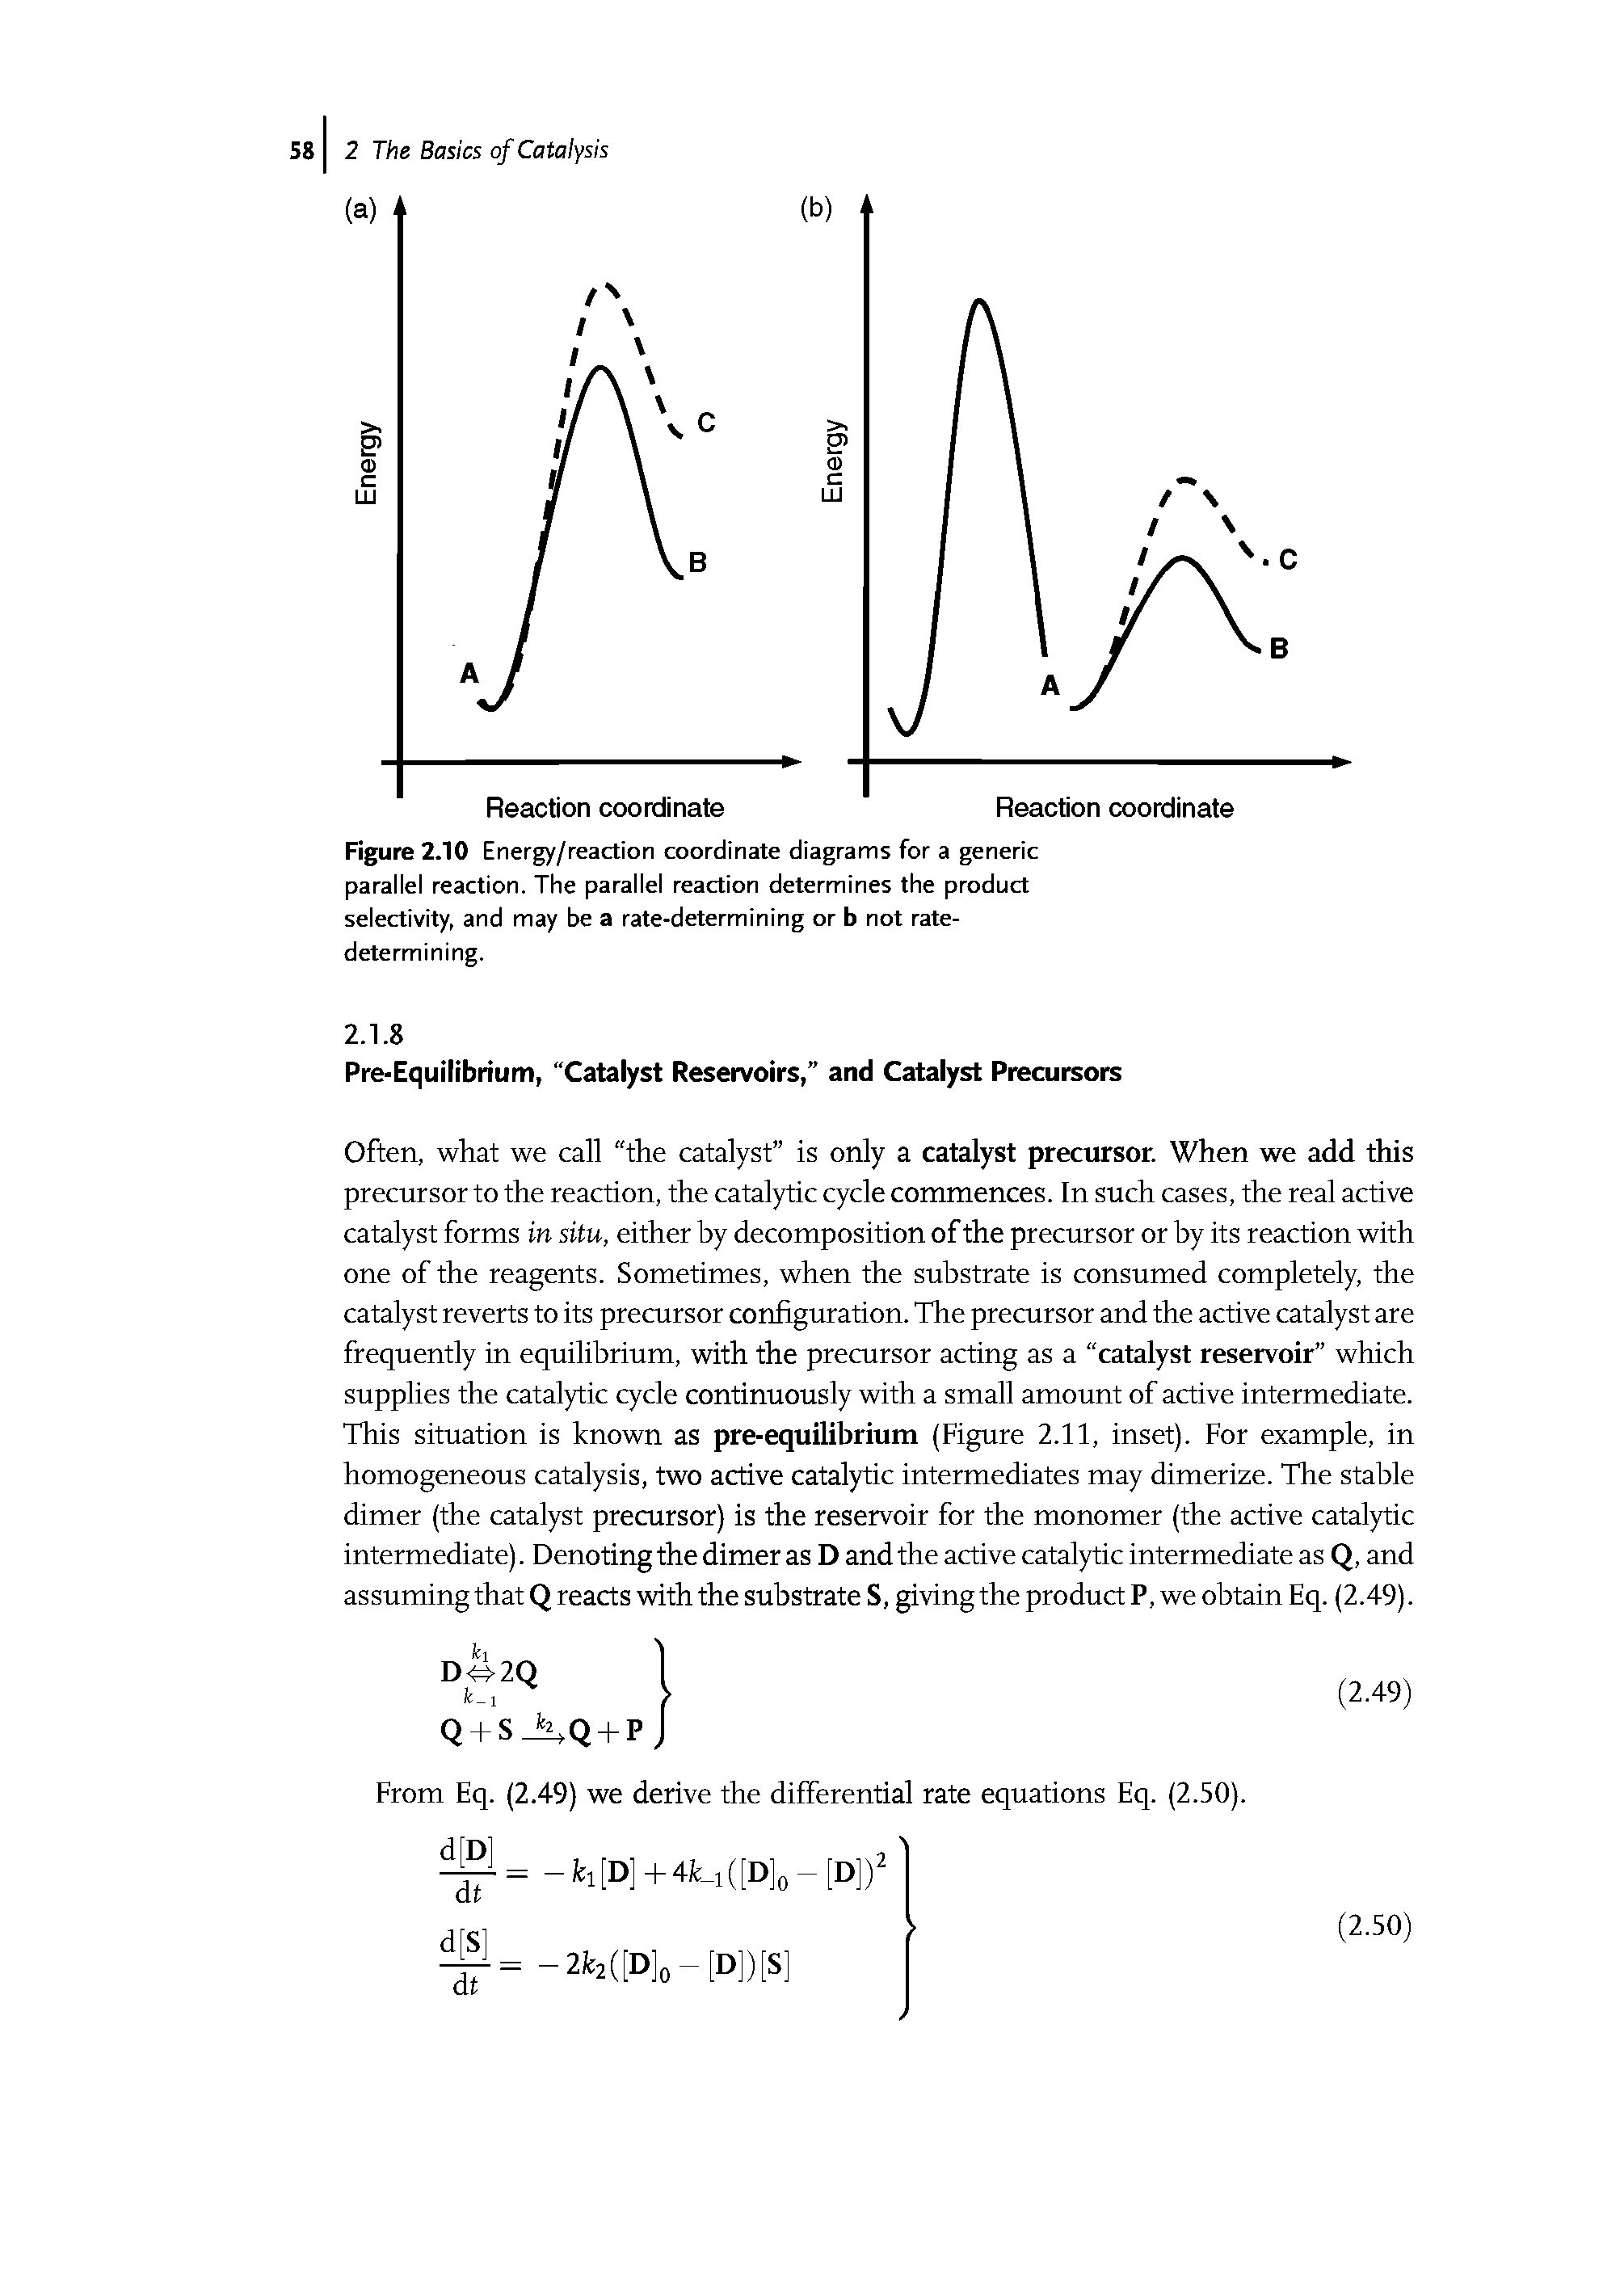 Figure 2.10 Energy/reaction coordinate diagrams for a generic parallel reaction. The parallel reaction determines the product selectivity, and may be a rate-determining or b not ratedetermining.